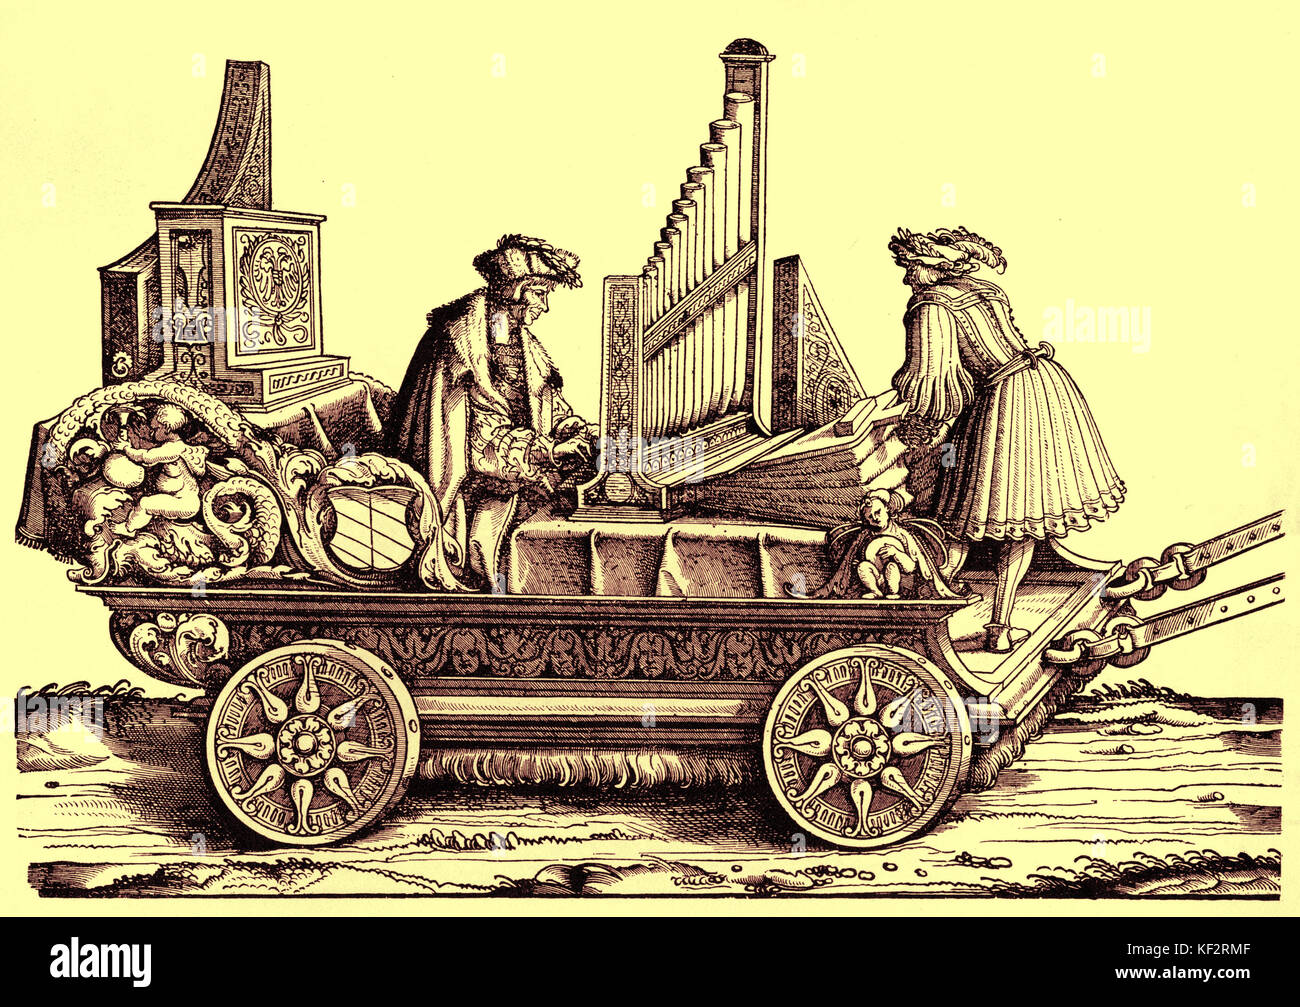 Portative organ - Court Organist Hofhaimer playing keyboard, the other pumping bellows- at the same it is on wheels and is being transported in a procession. Detail from 'The Triumph of Maximilian', by Burgkmair, c1515 . (Regal & Organ case, at back of wagon ) Stock Photo